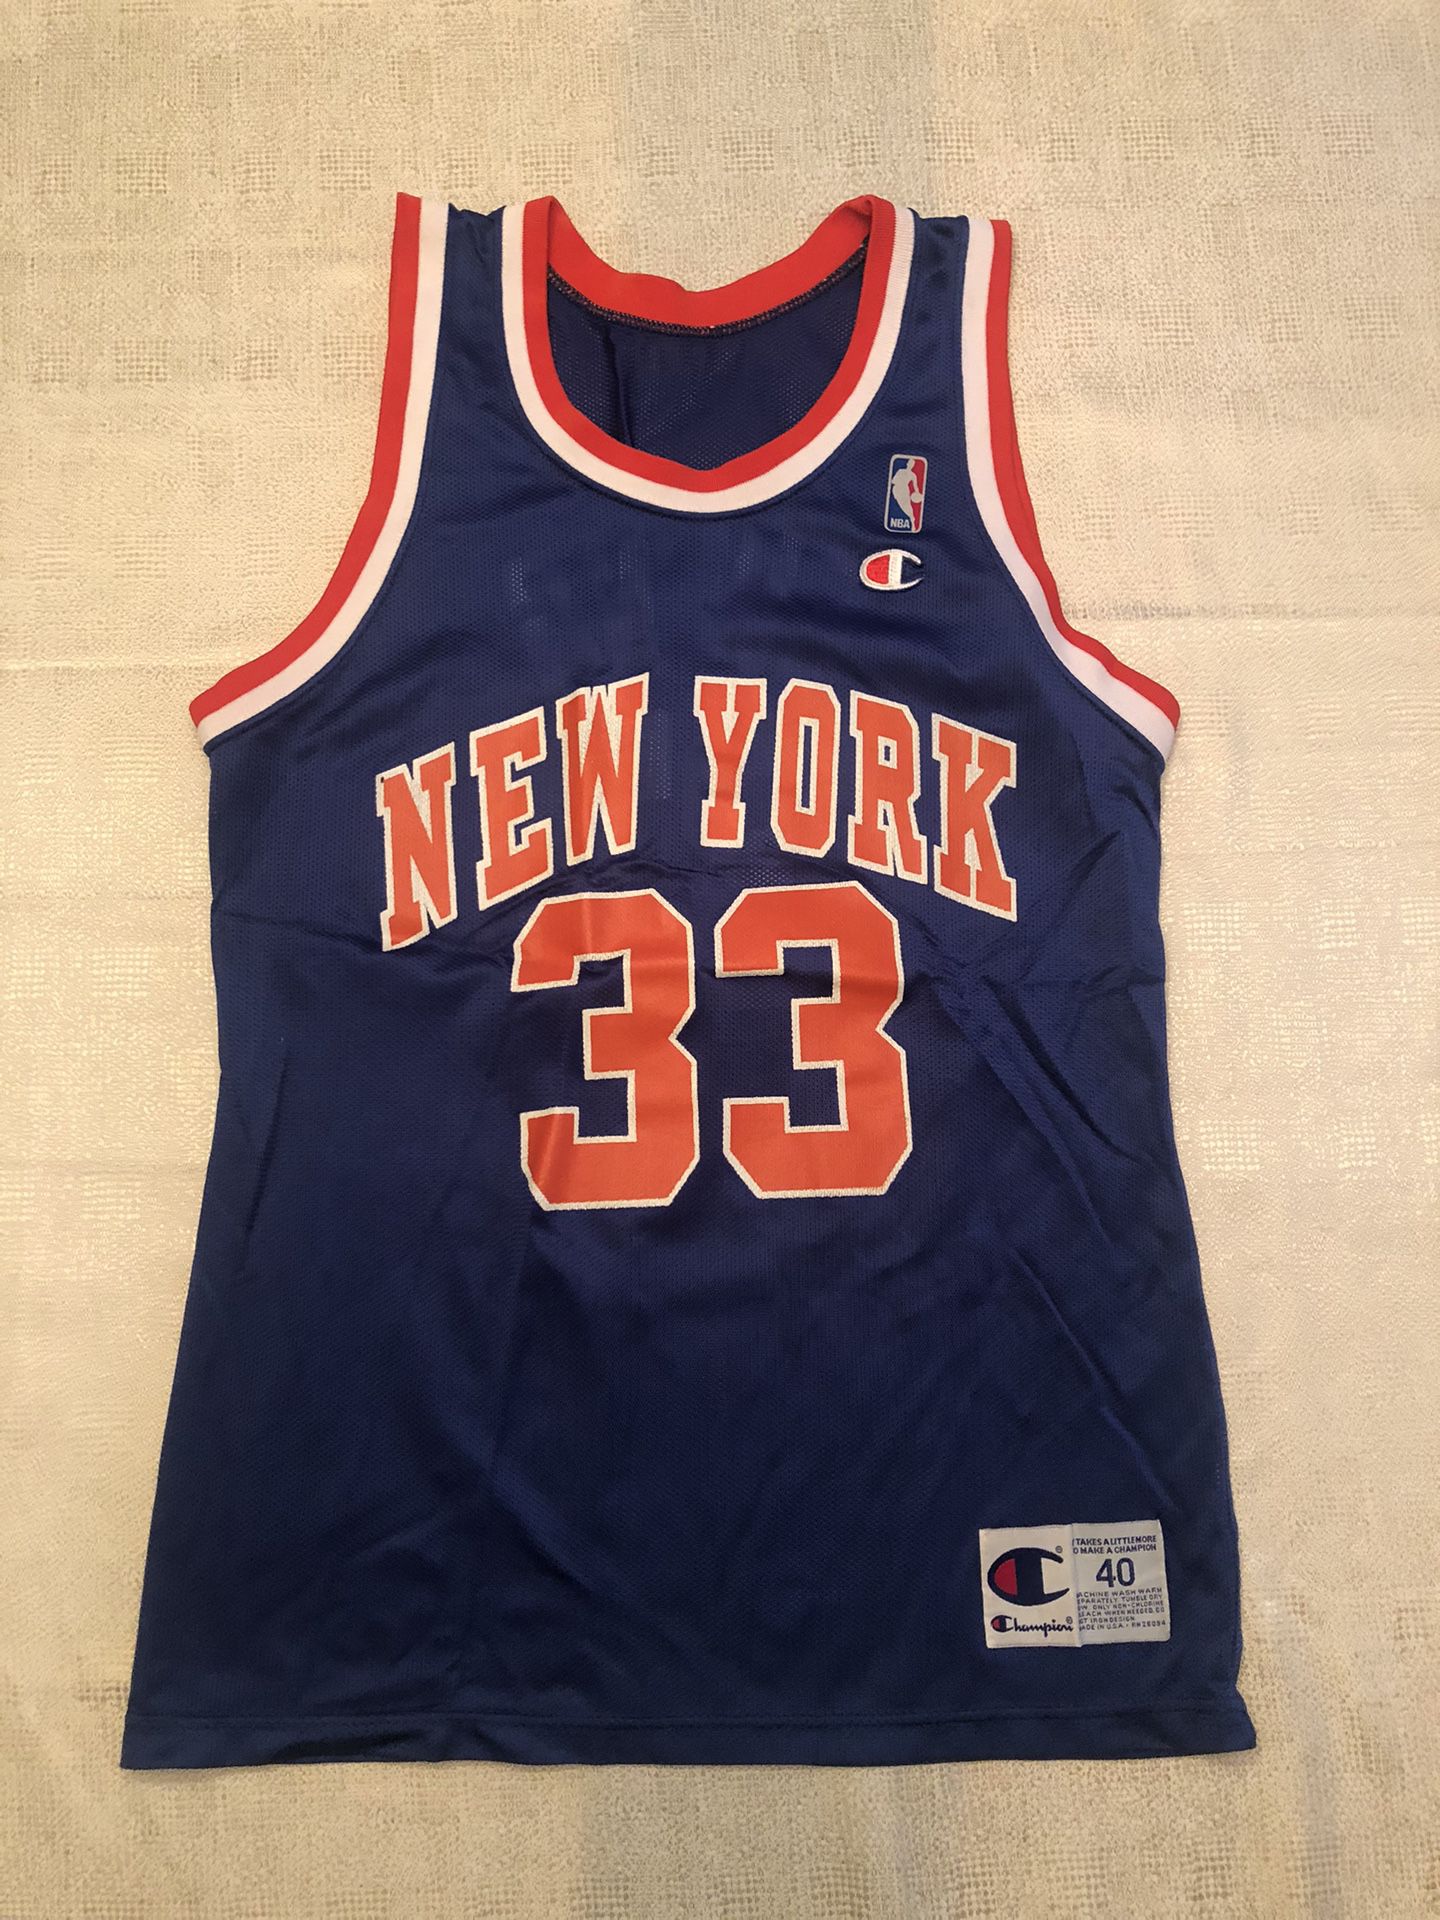 Vintage Patrick Ewing New York Knicks Adidas Hardwood classic Jersey! for  Sale in Melrose Park, IL - OfferUp